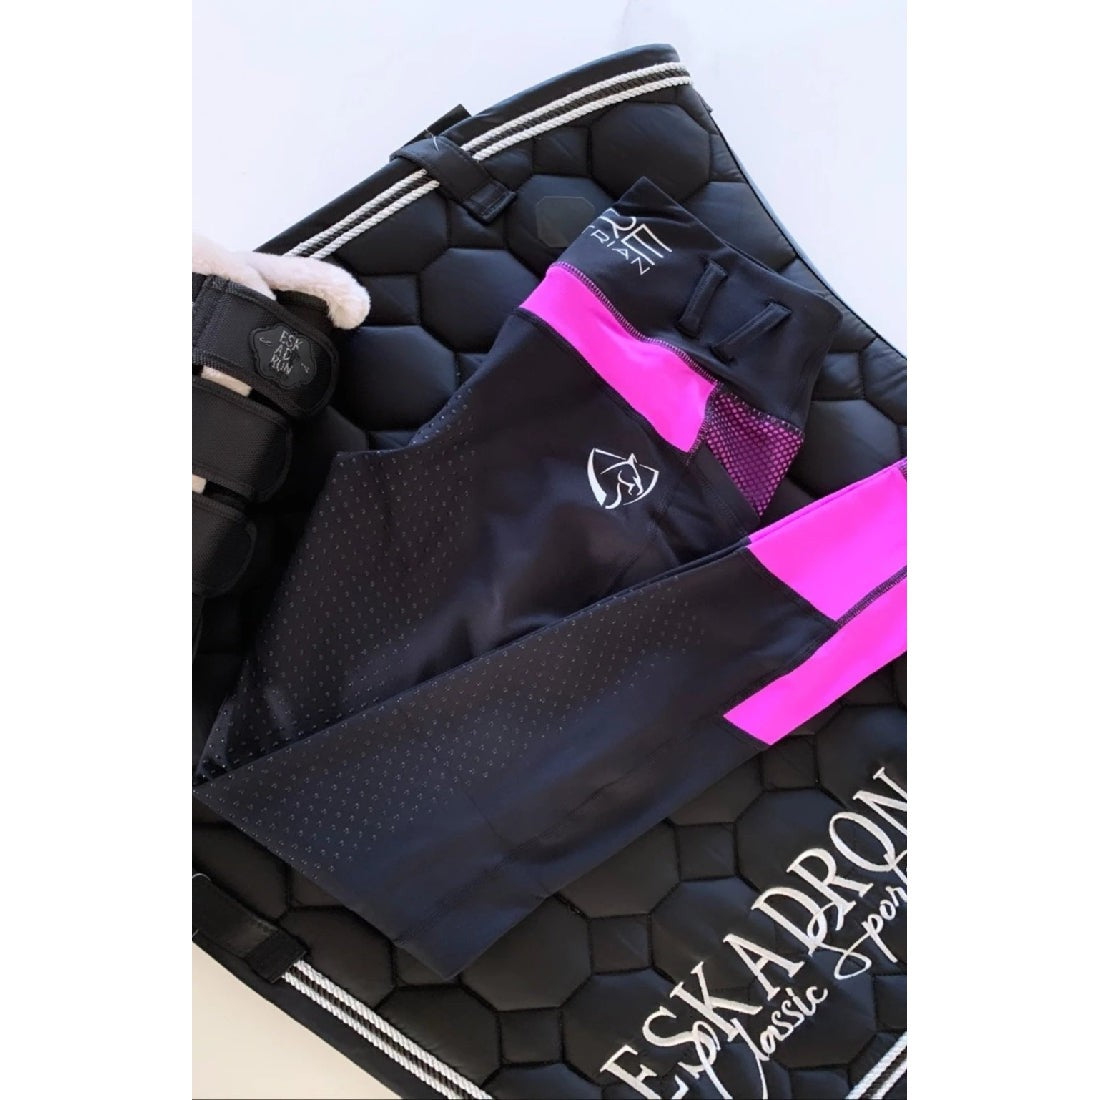 Black and pink horse riding tights with equestrian gear displayed.